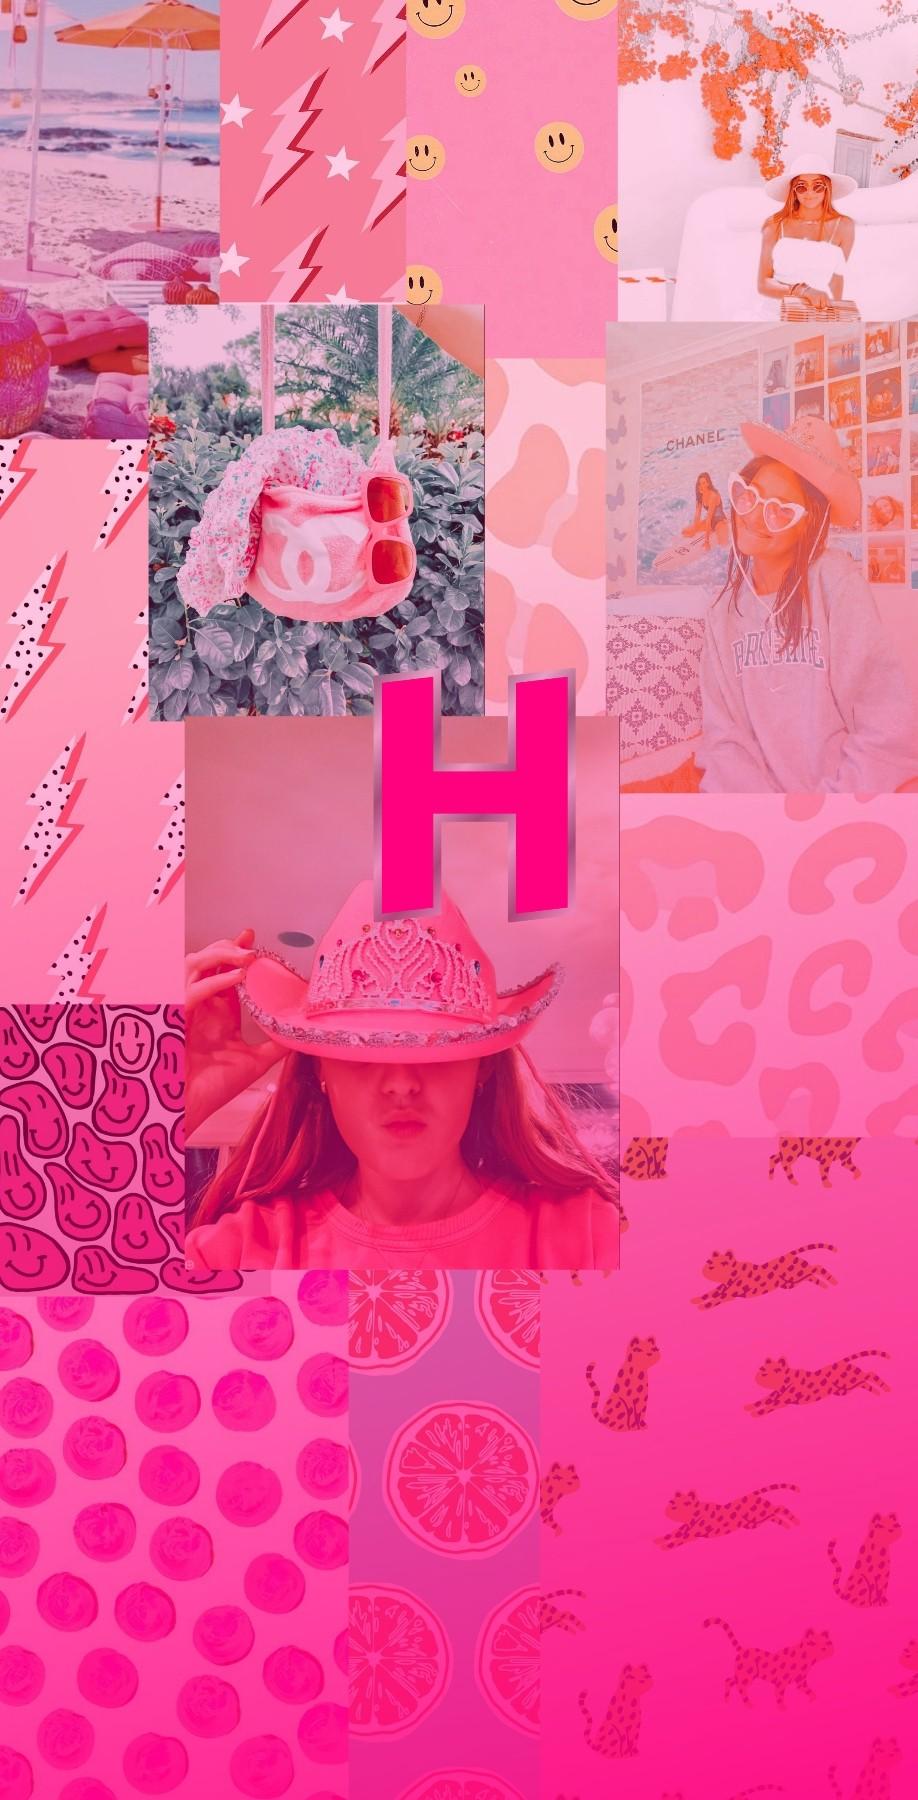 A collage of pink and orange images including a girl in a pink hat, a bag with the letter H on it, and various fruit images - Preppy